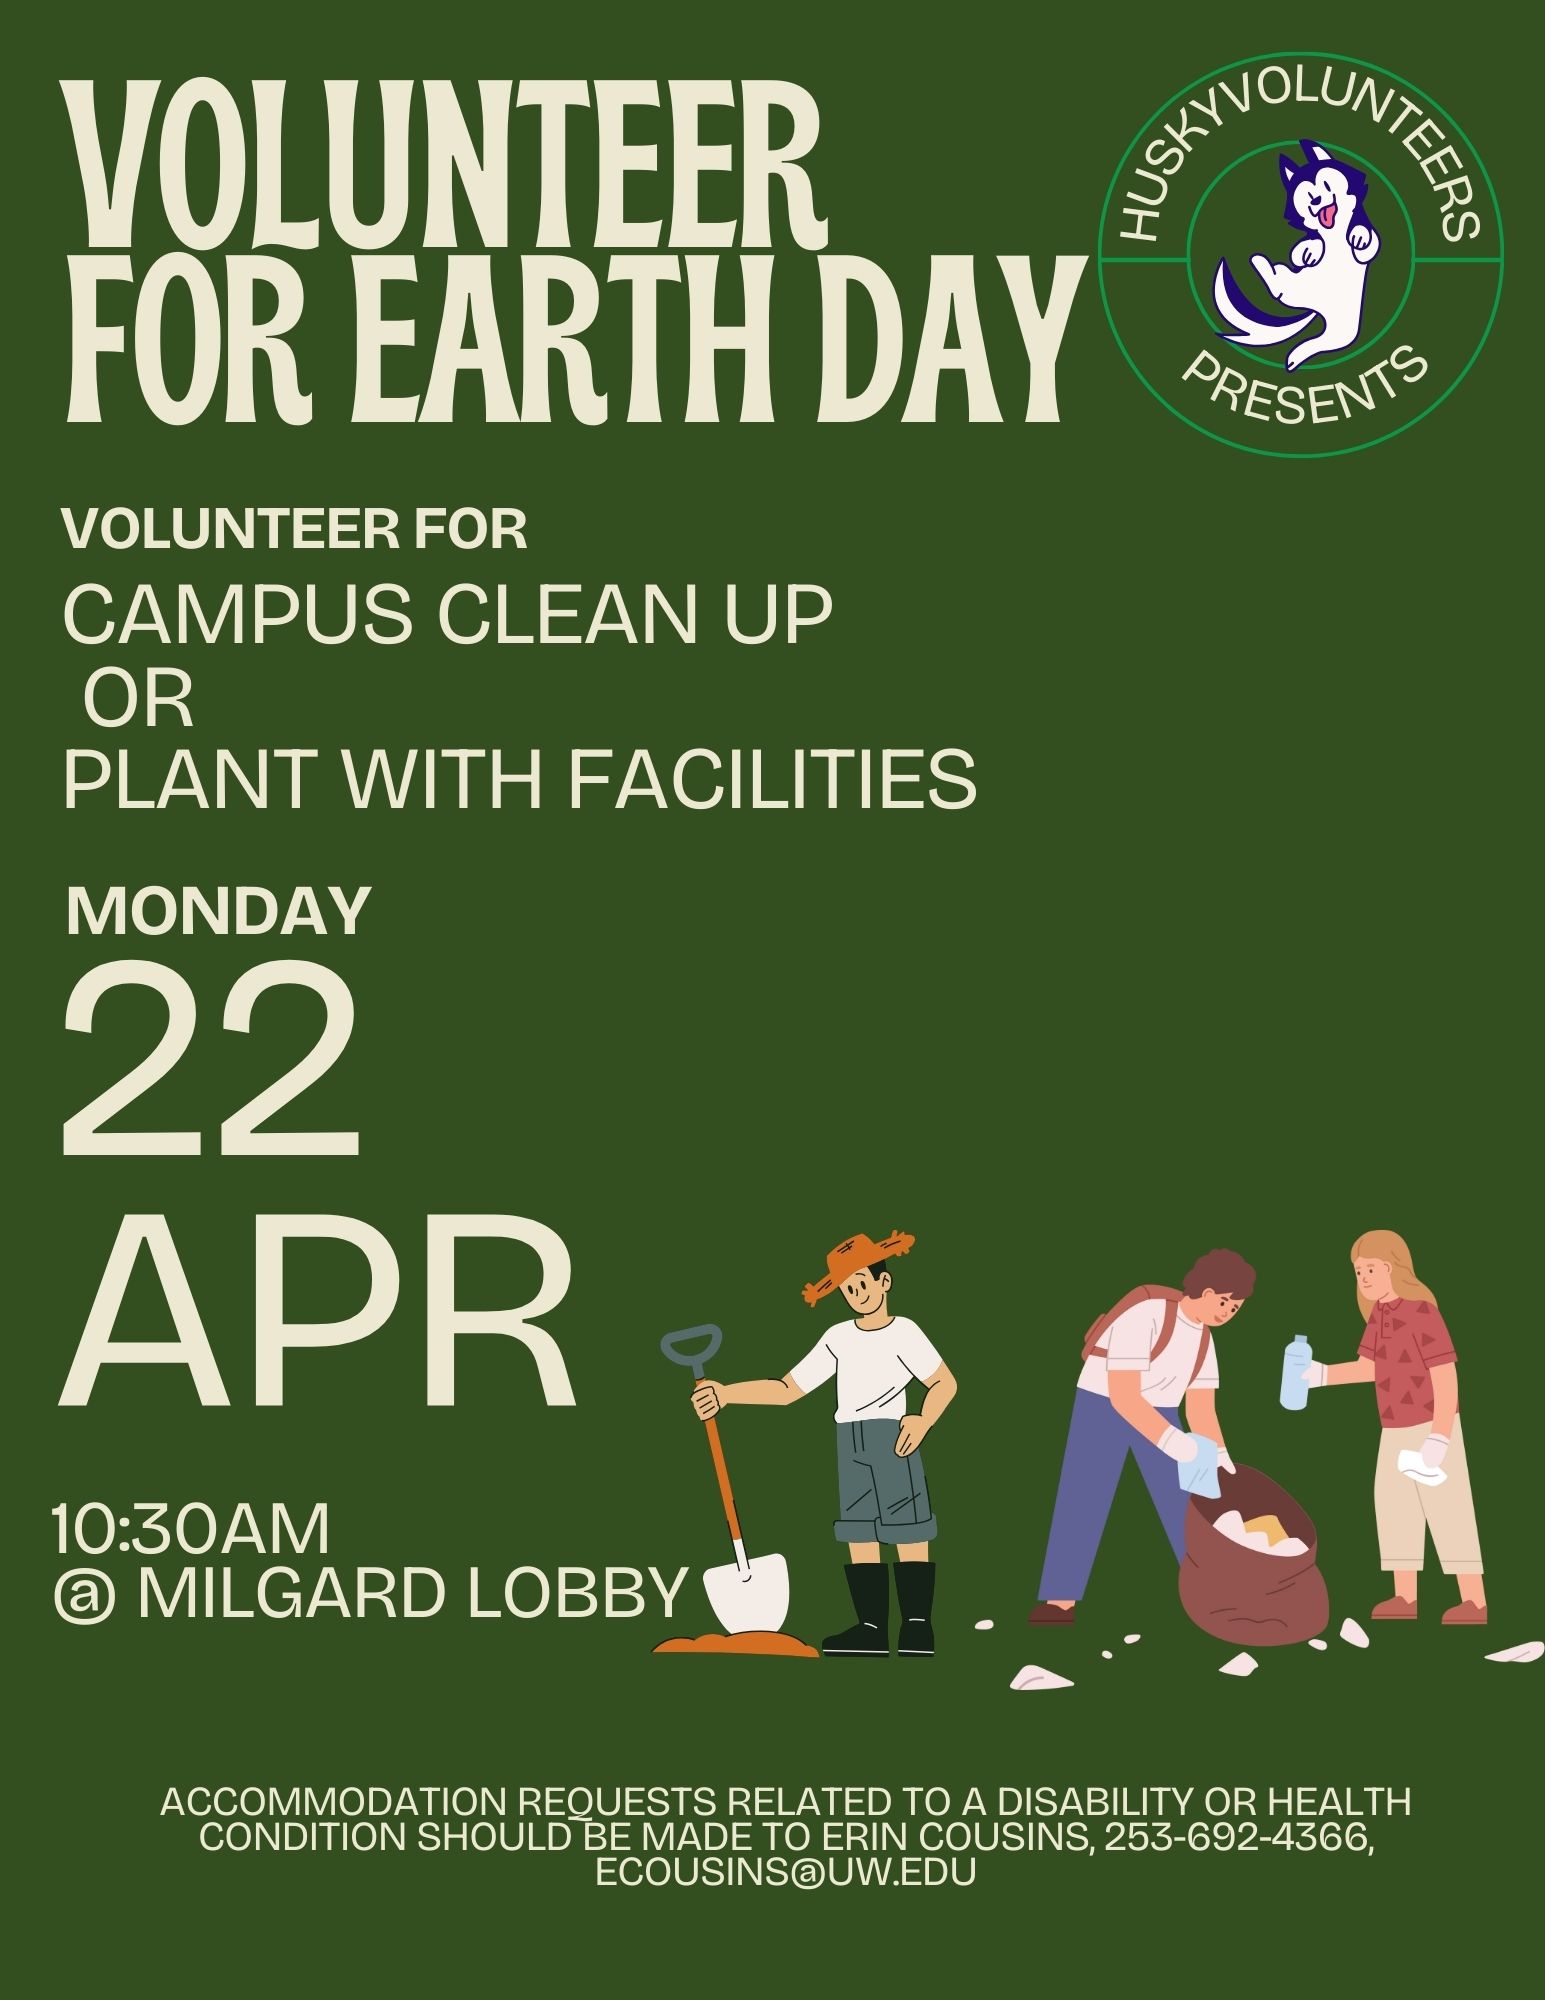 Flyer for the Earth Day volunteer opportunities: campus clean up and planting with Facilities. Event will take place on April 22 at 10:30am in Milgard Lobby